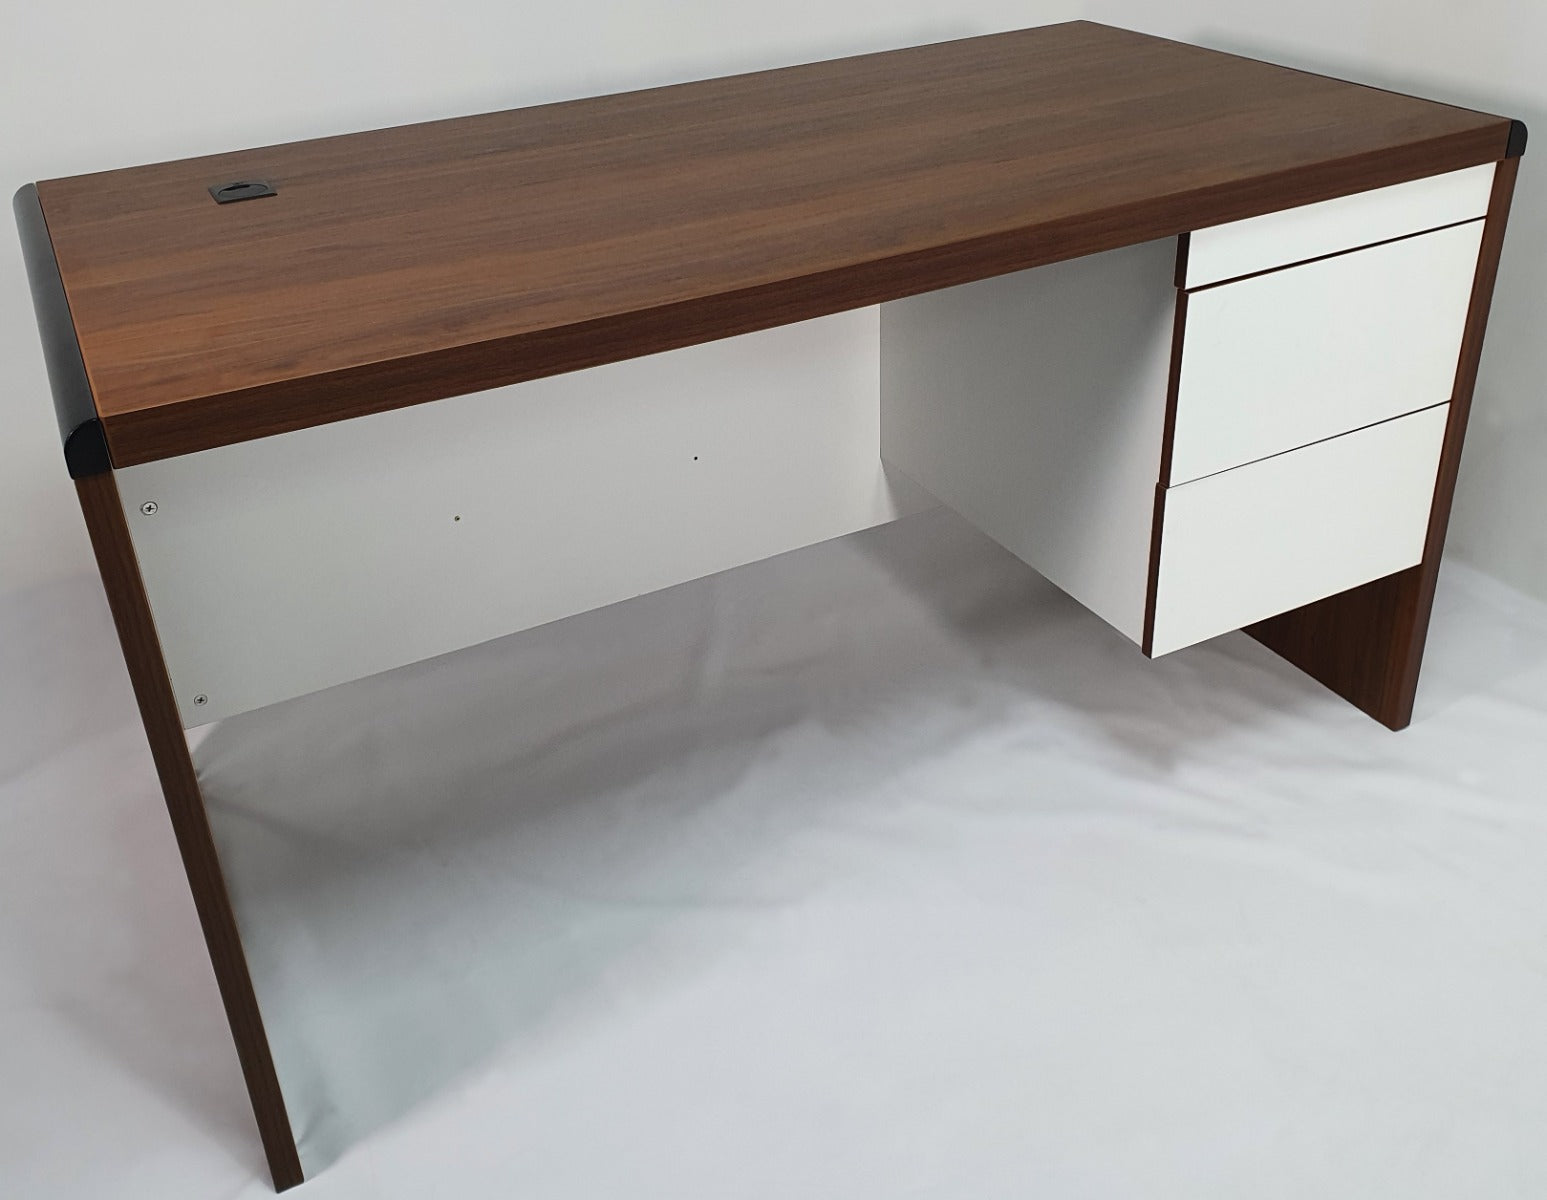 Walnut and White MFC Office Desk with Integrated Storage - 1412